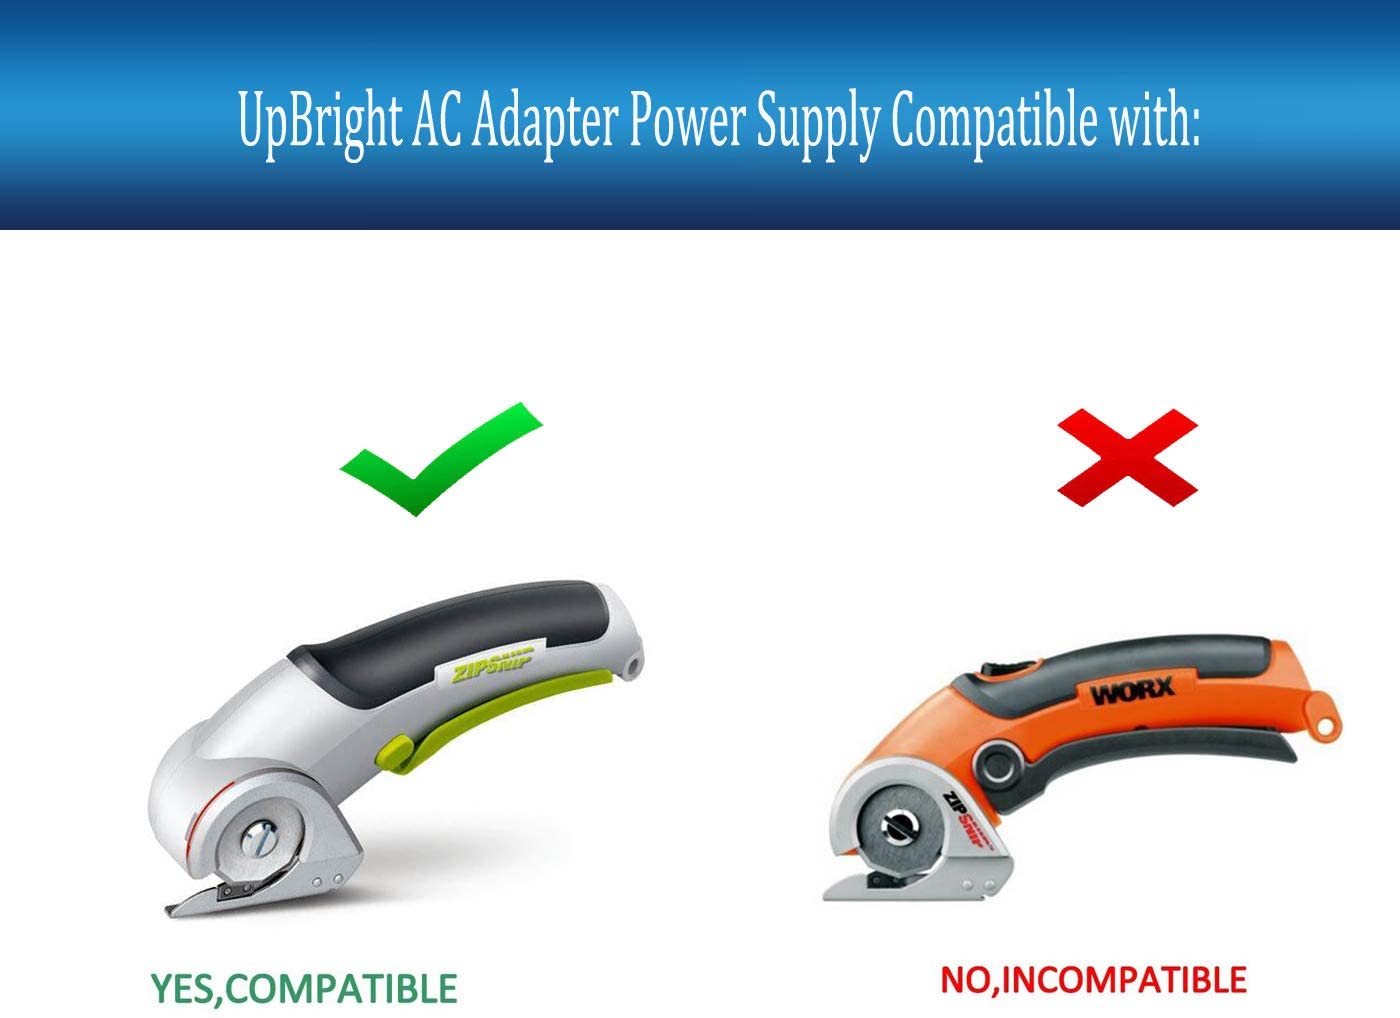 UPBRIGHT 5V AC/DC Adapter Compatible with ZipSnip RC2602 M RC2602M Zip Snip  RC2600 ShopSeries Rockwell 3.6V Lithium Battery Cutter Cutting Tool  41014807000 BHY410700250U 4.8V 7V Power Supply Charger 